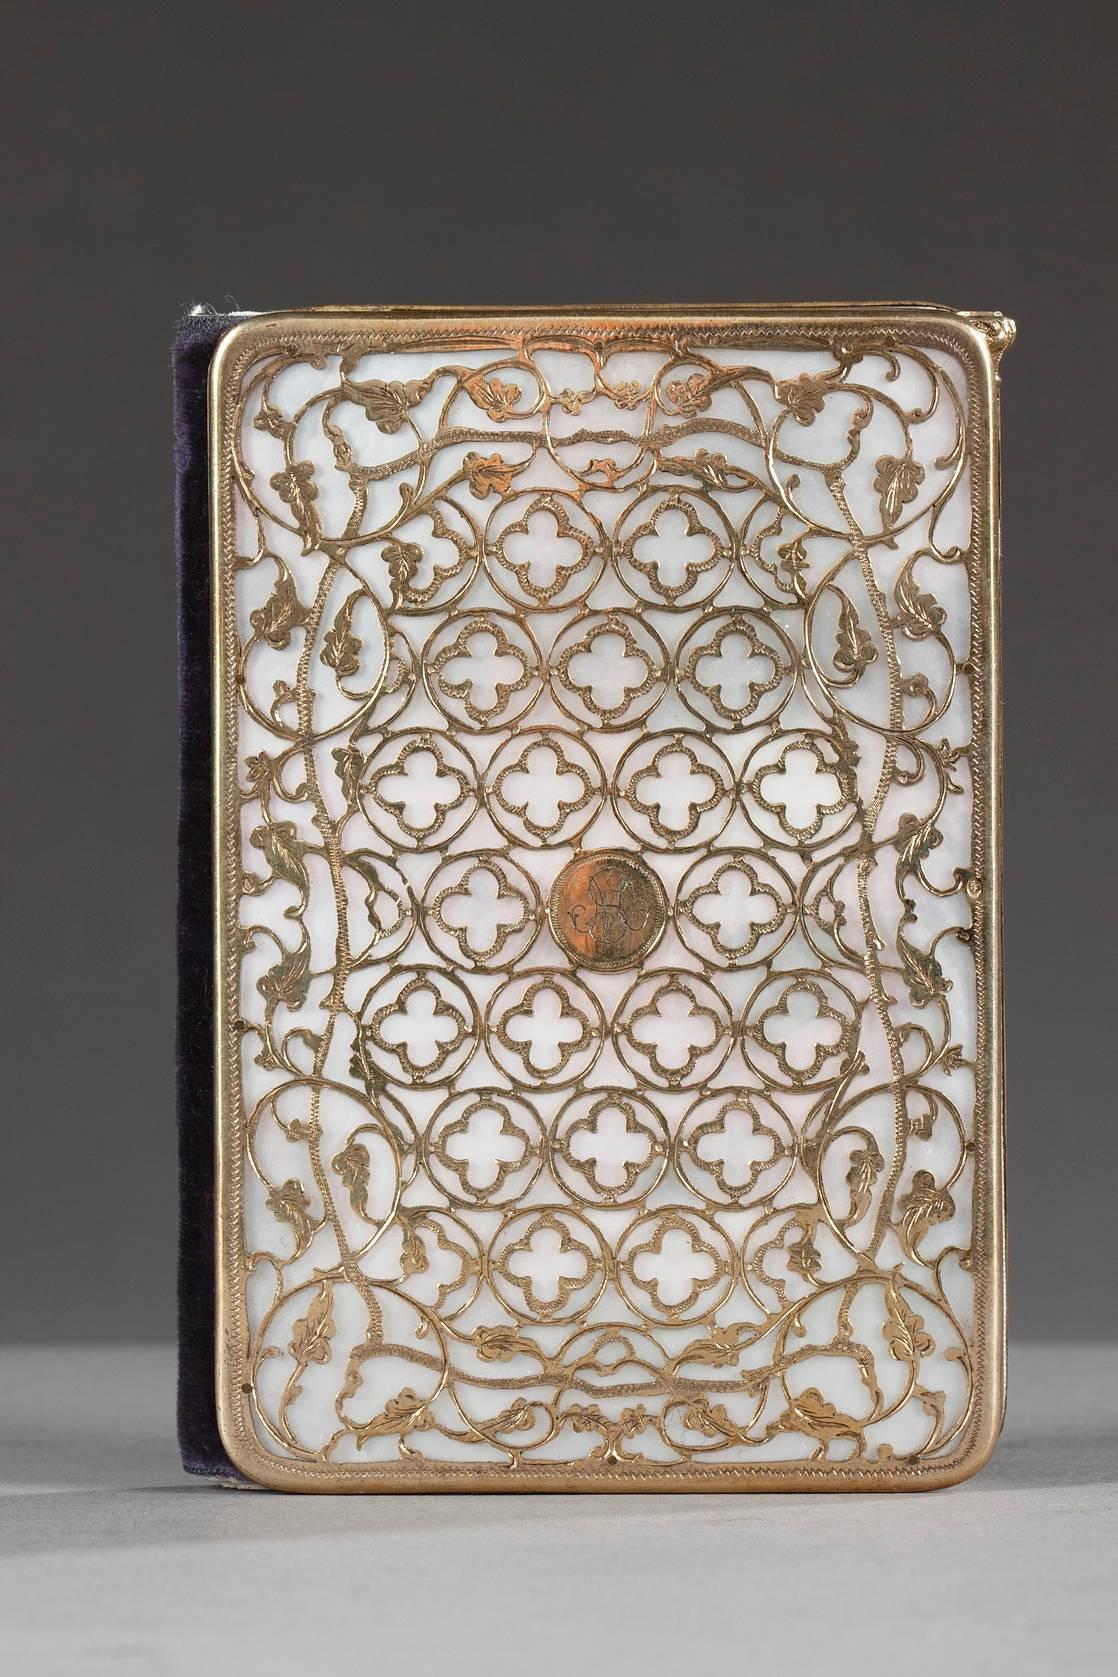 French 19th Century Dance Card in Mother of Pearl and Silver Gilt. Tahan 